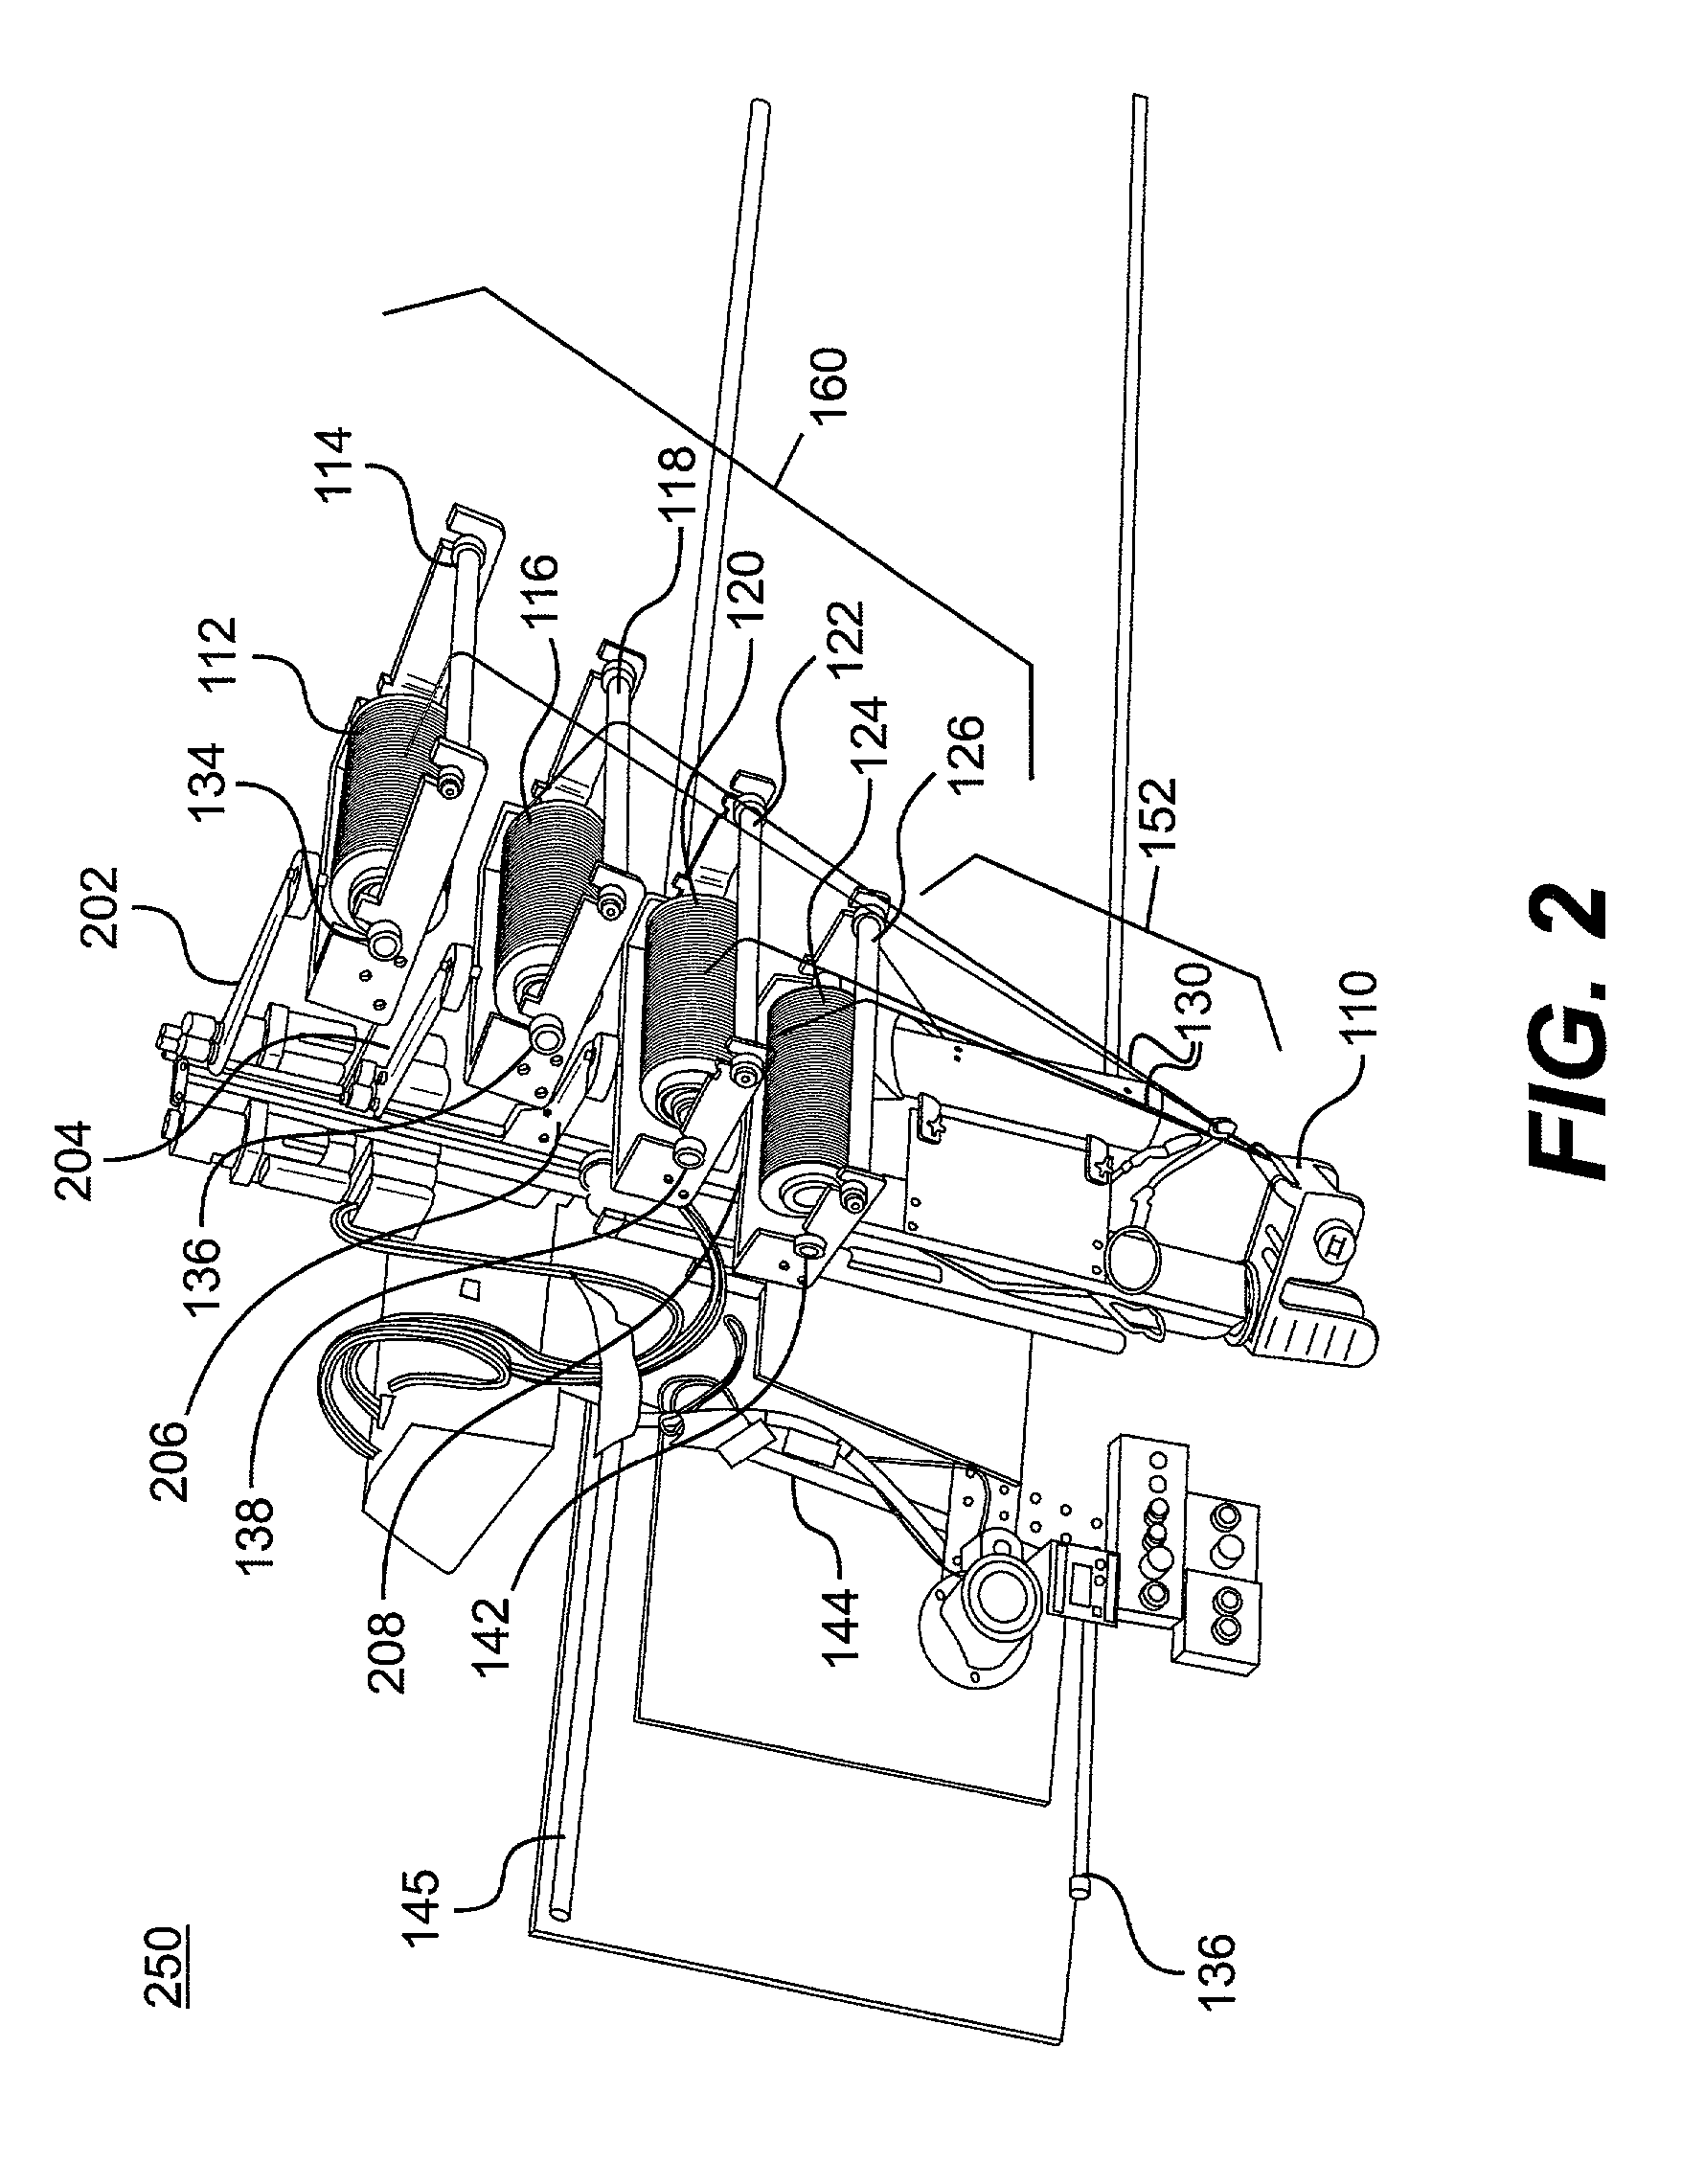 Filament winding apparatus and methods of winding filament